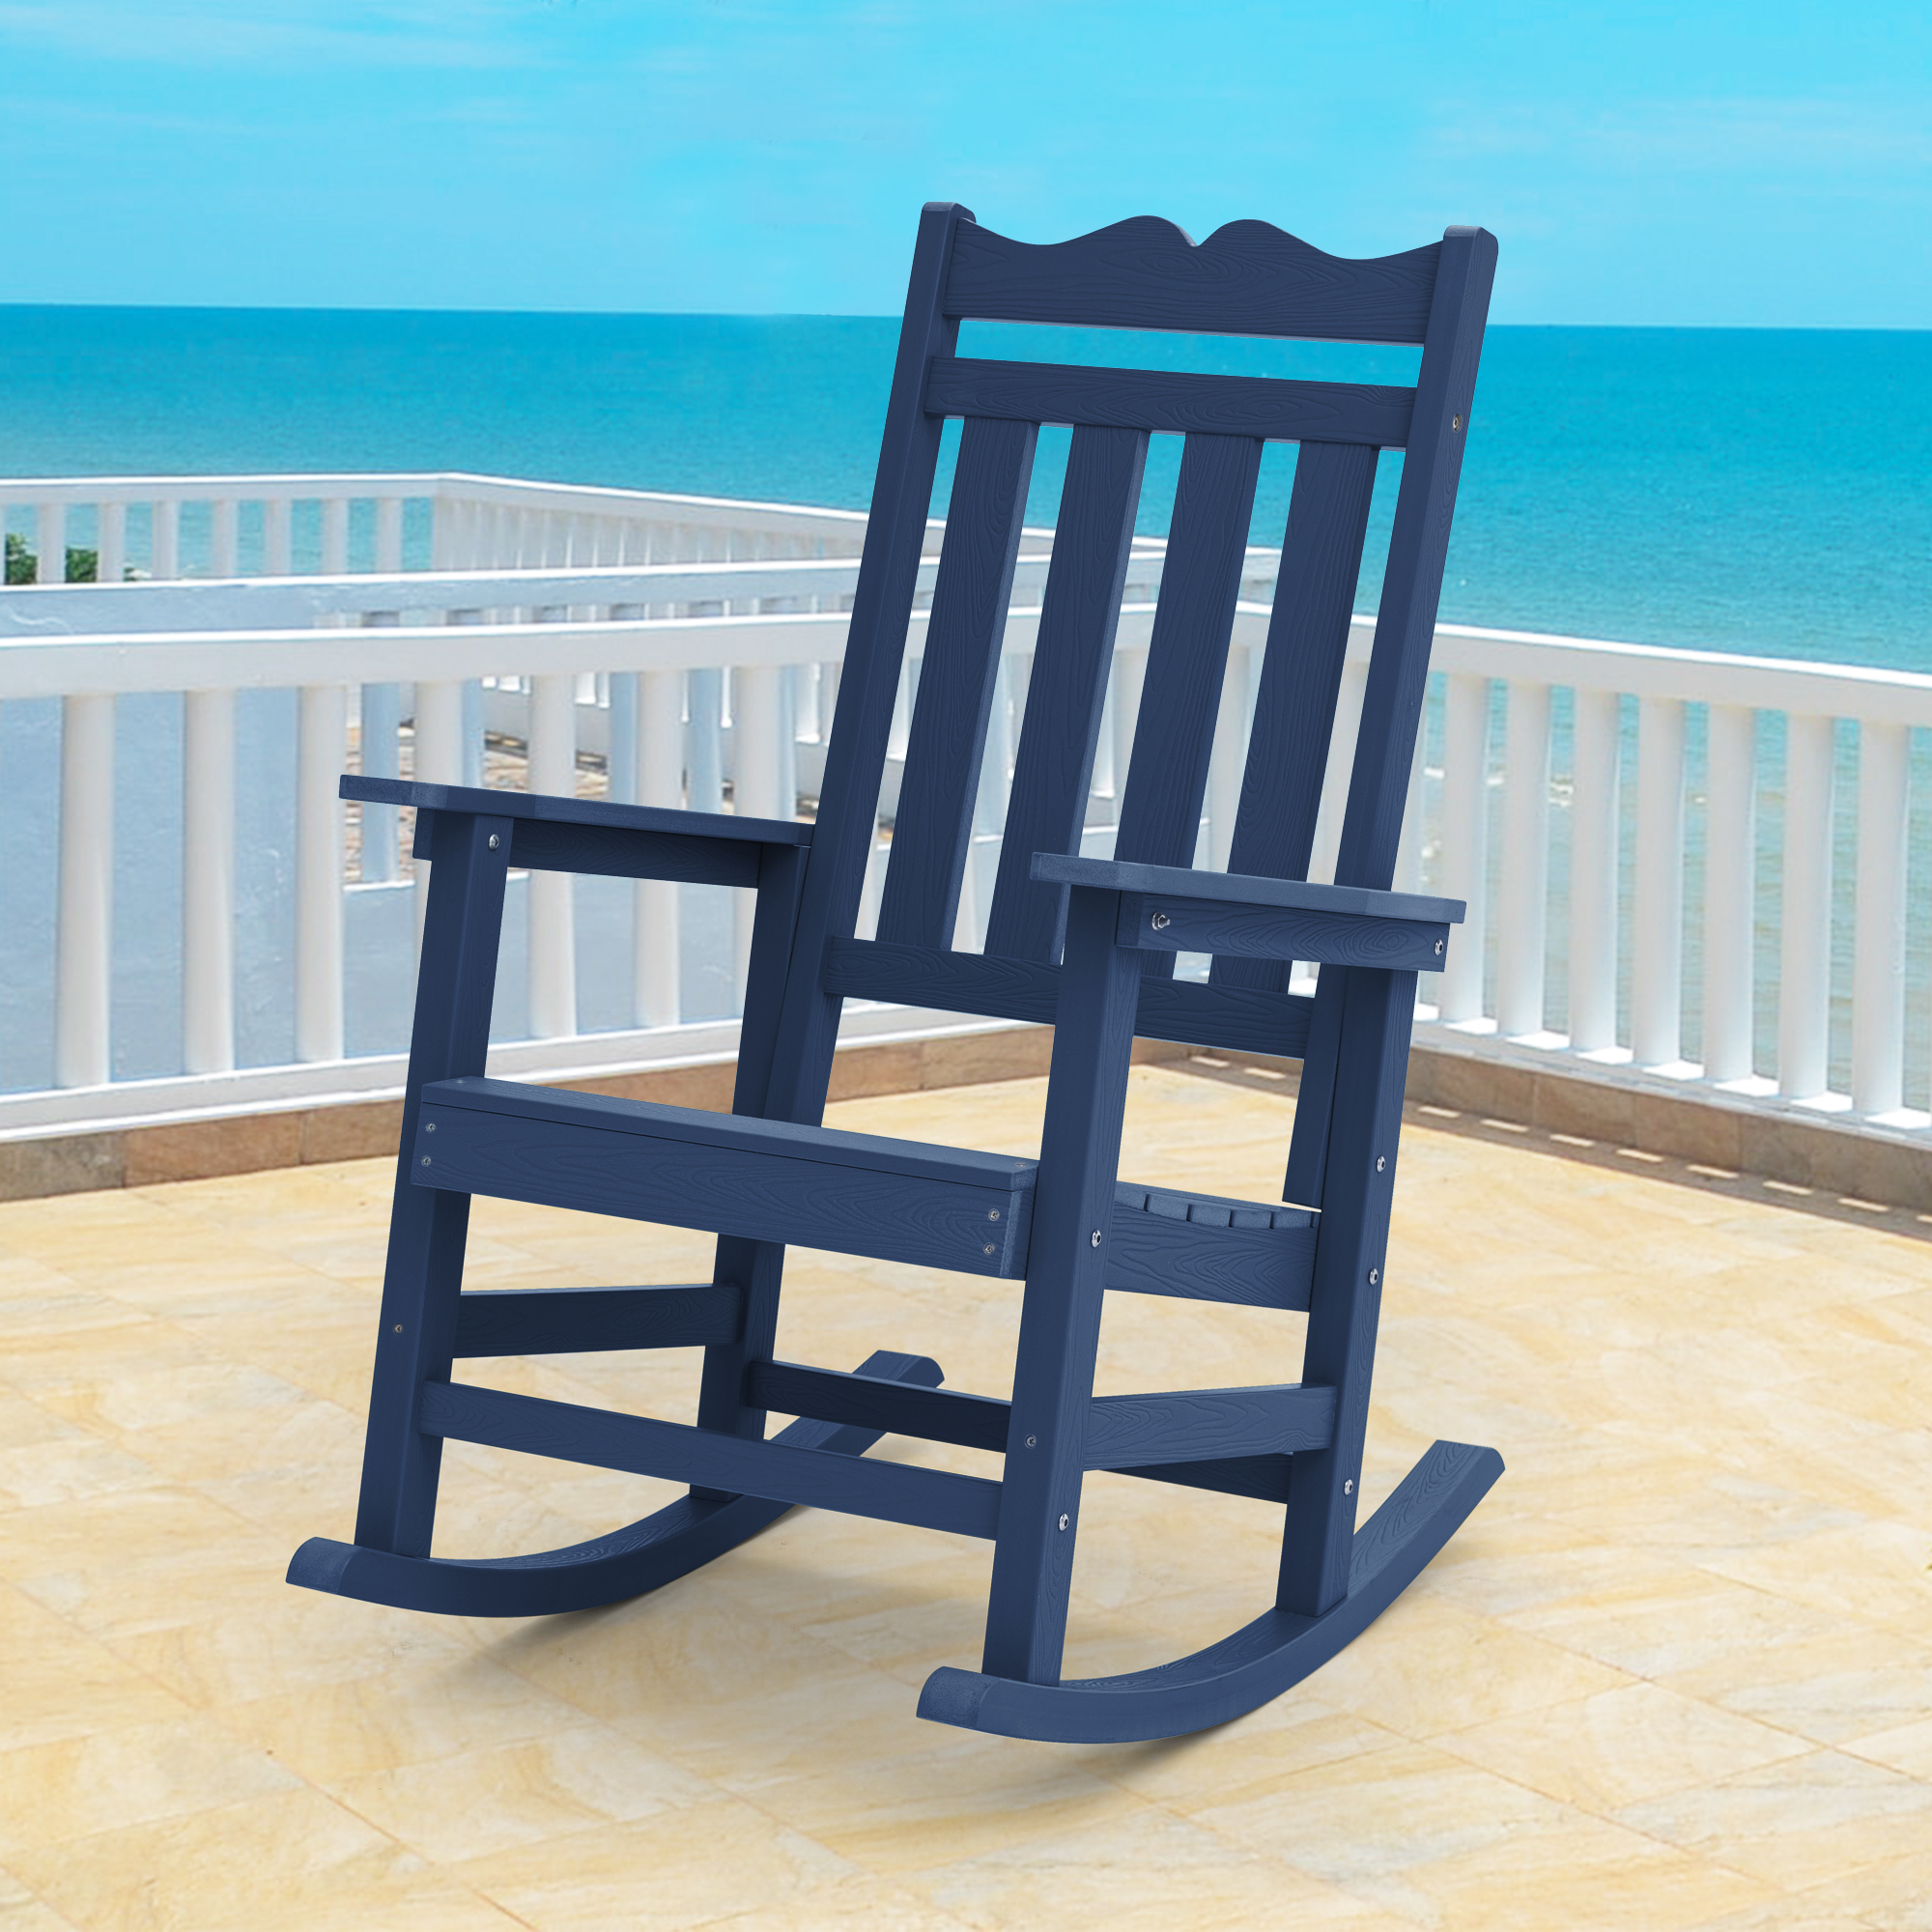 CHYVARY 1 Peaks Patio Adirondack Chair Plastic Single Chairs, Rocking Chair Fire Pit Outdoor Lounge Chair for Lawn and Garden,Navy Blue - image 1 of 8